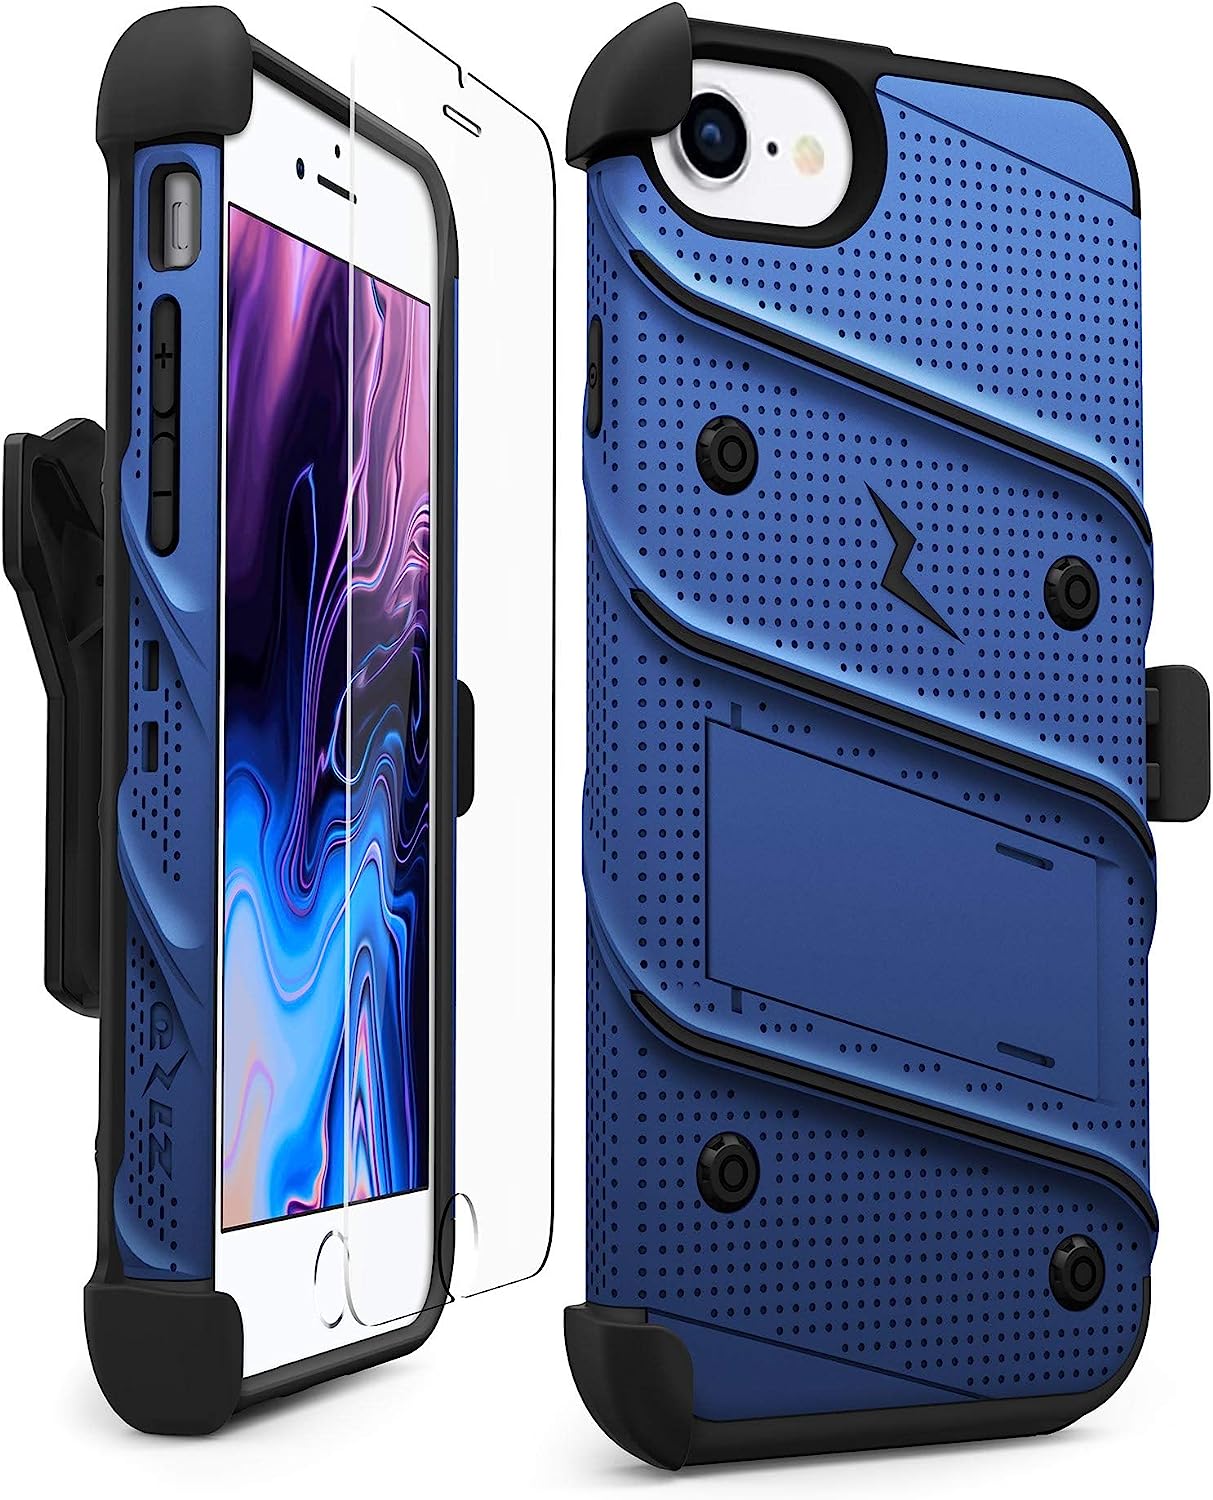 ZIZO Bolt iPhone SE (3rd and 2nd Gen) / 8 / 7 - Holsters Case with Screen Protector, Kickstand & Lanyard (2 Colors)